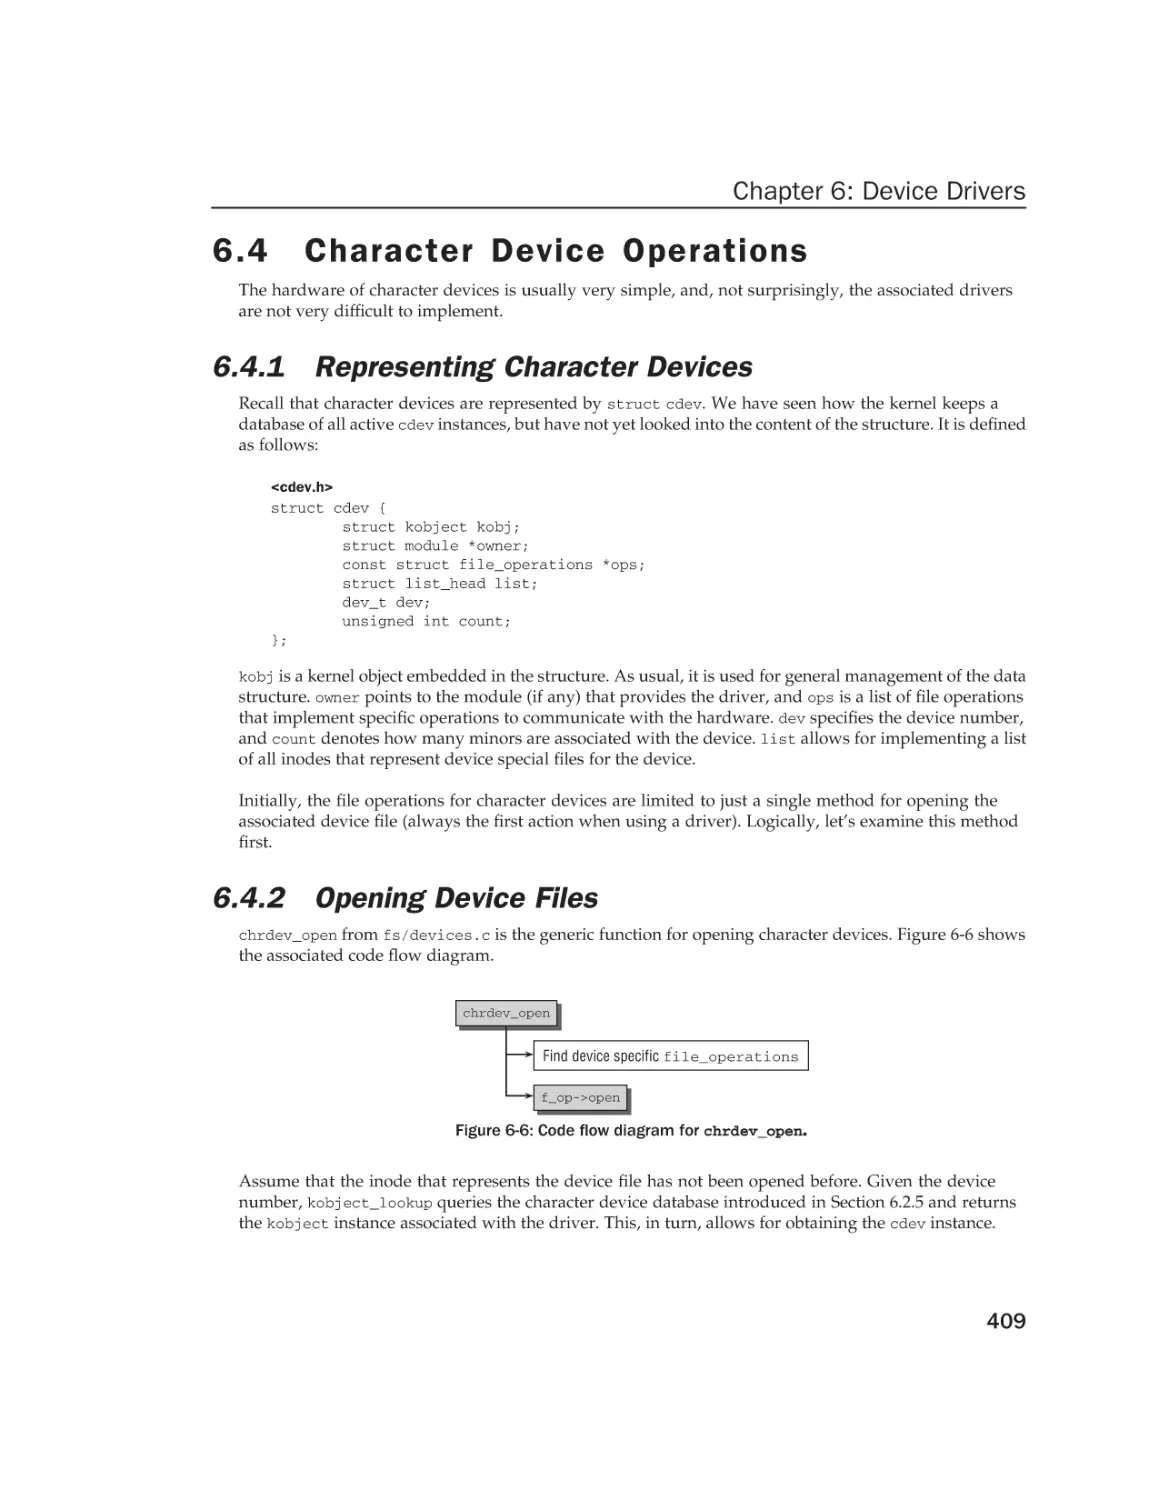 6.4 Character Device Operations